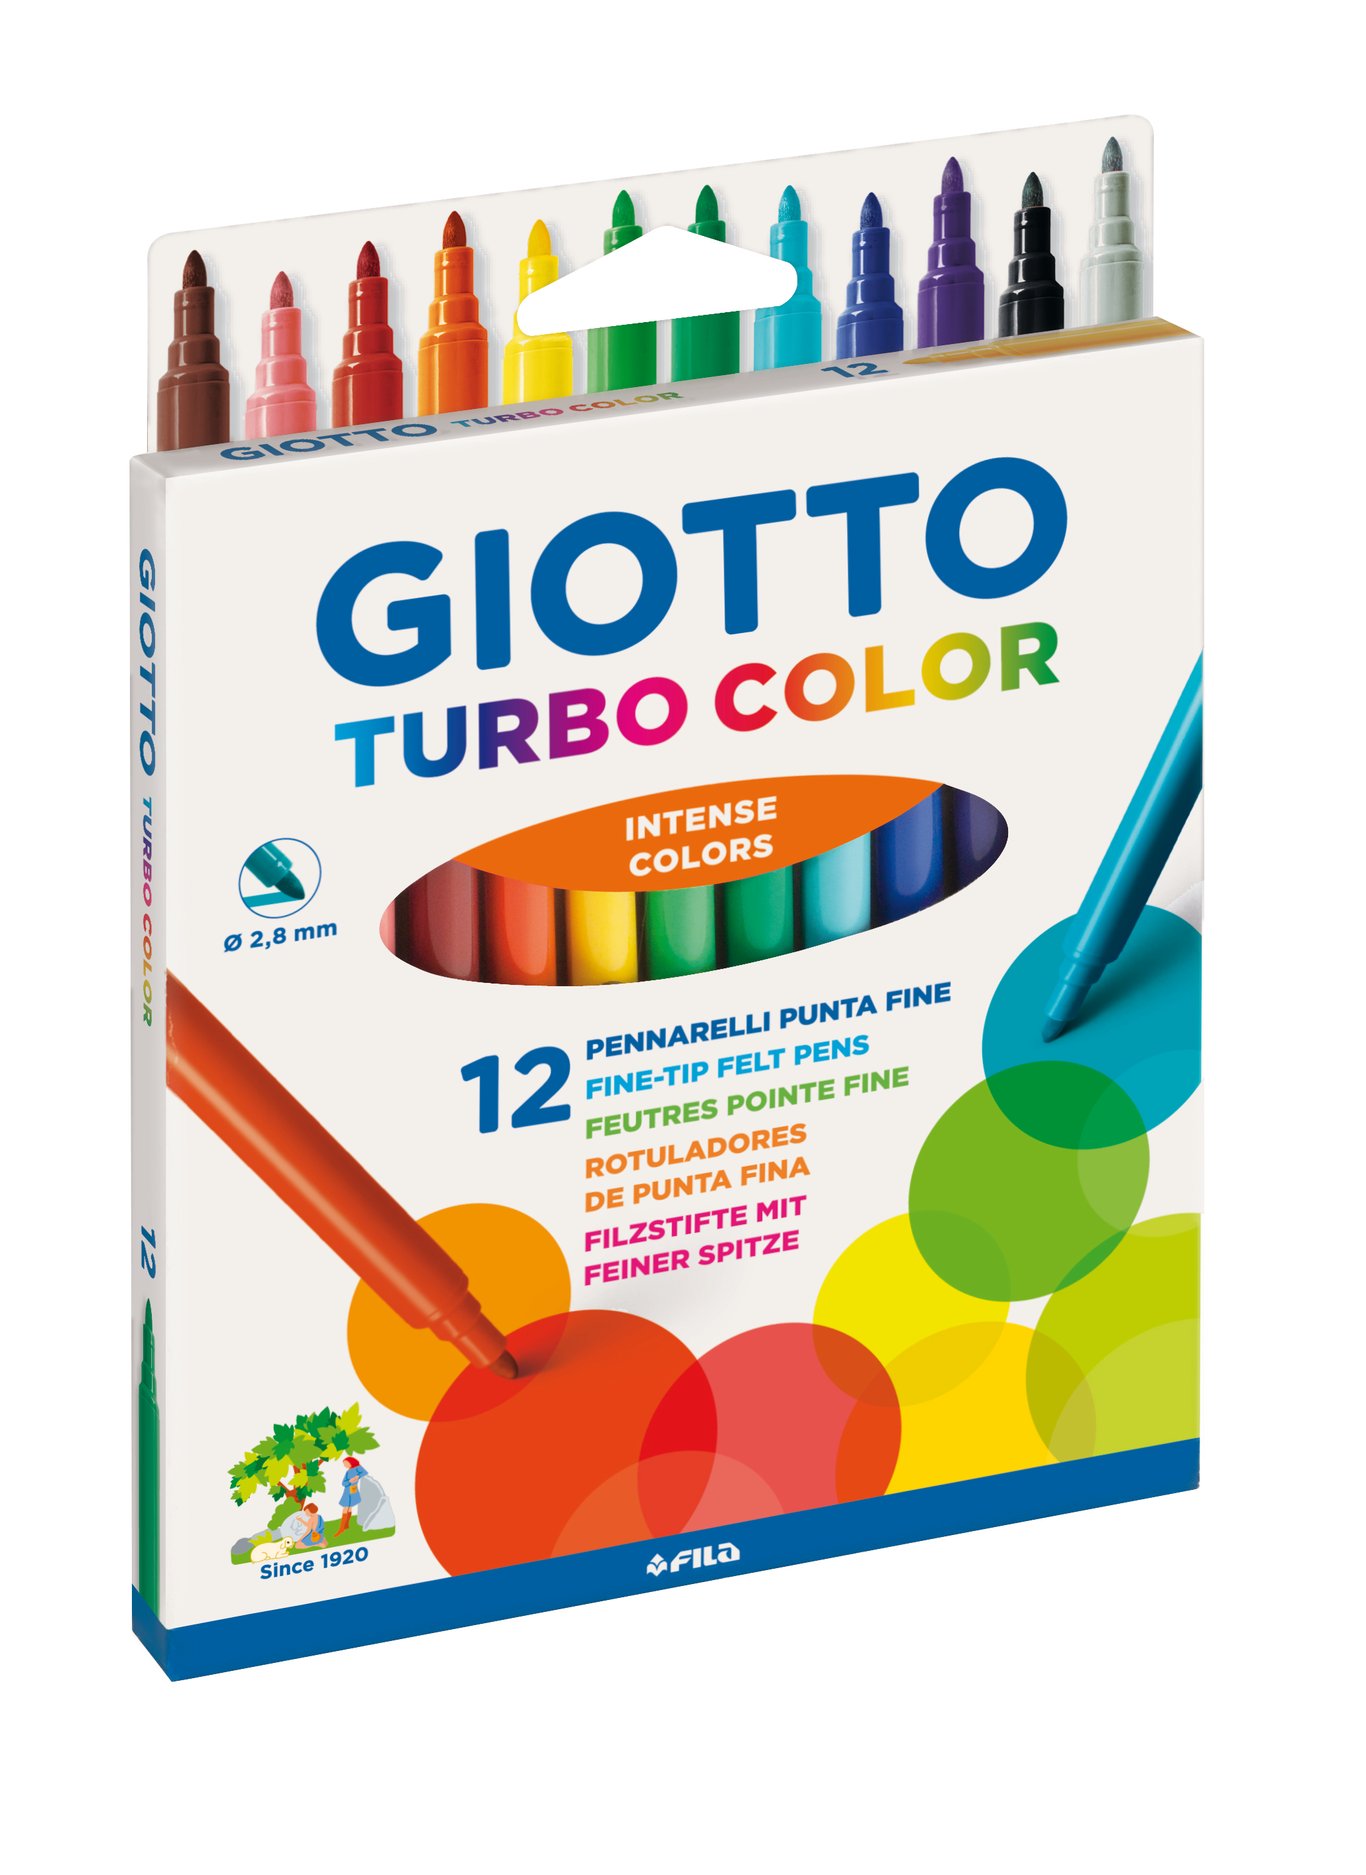 Fiberpenna Giotto Turbo Color 12-pack 12 färger 13100025